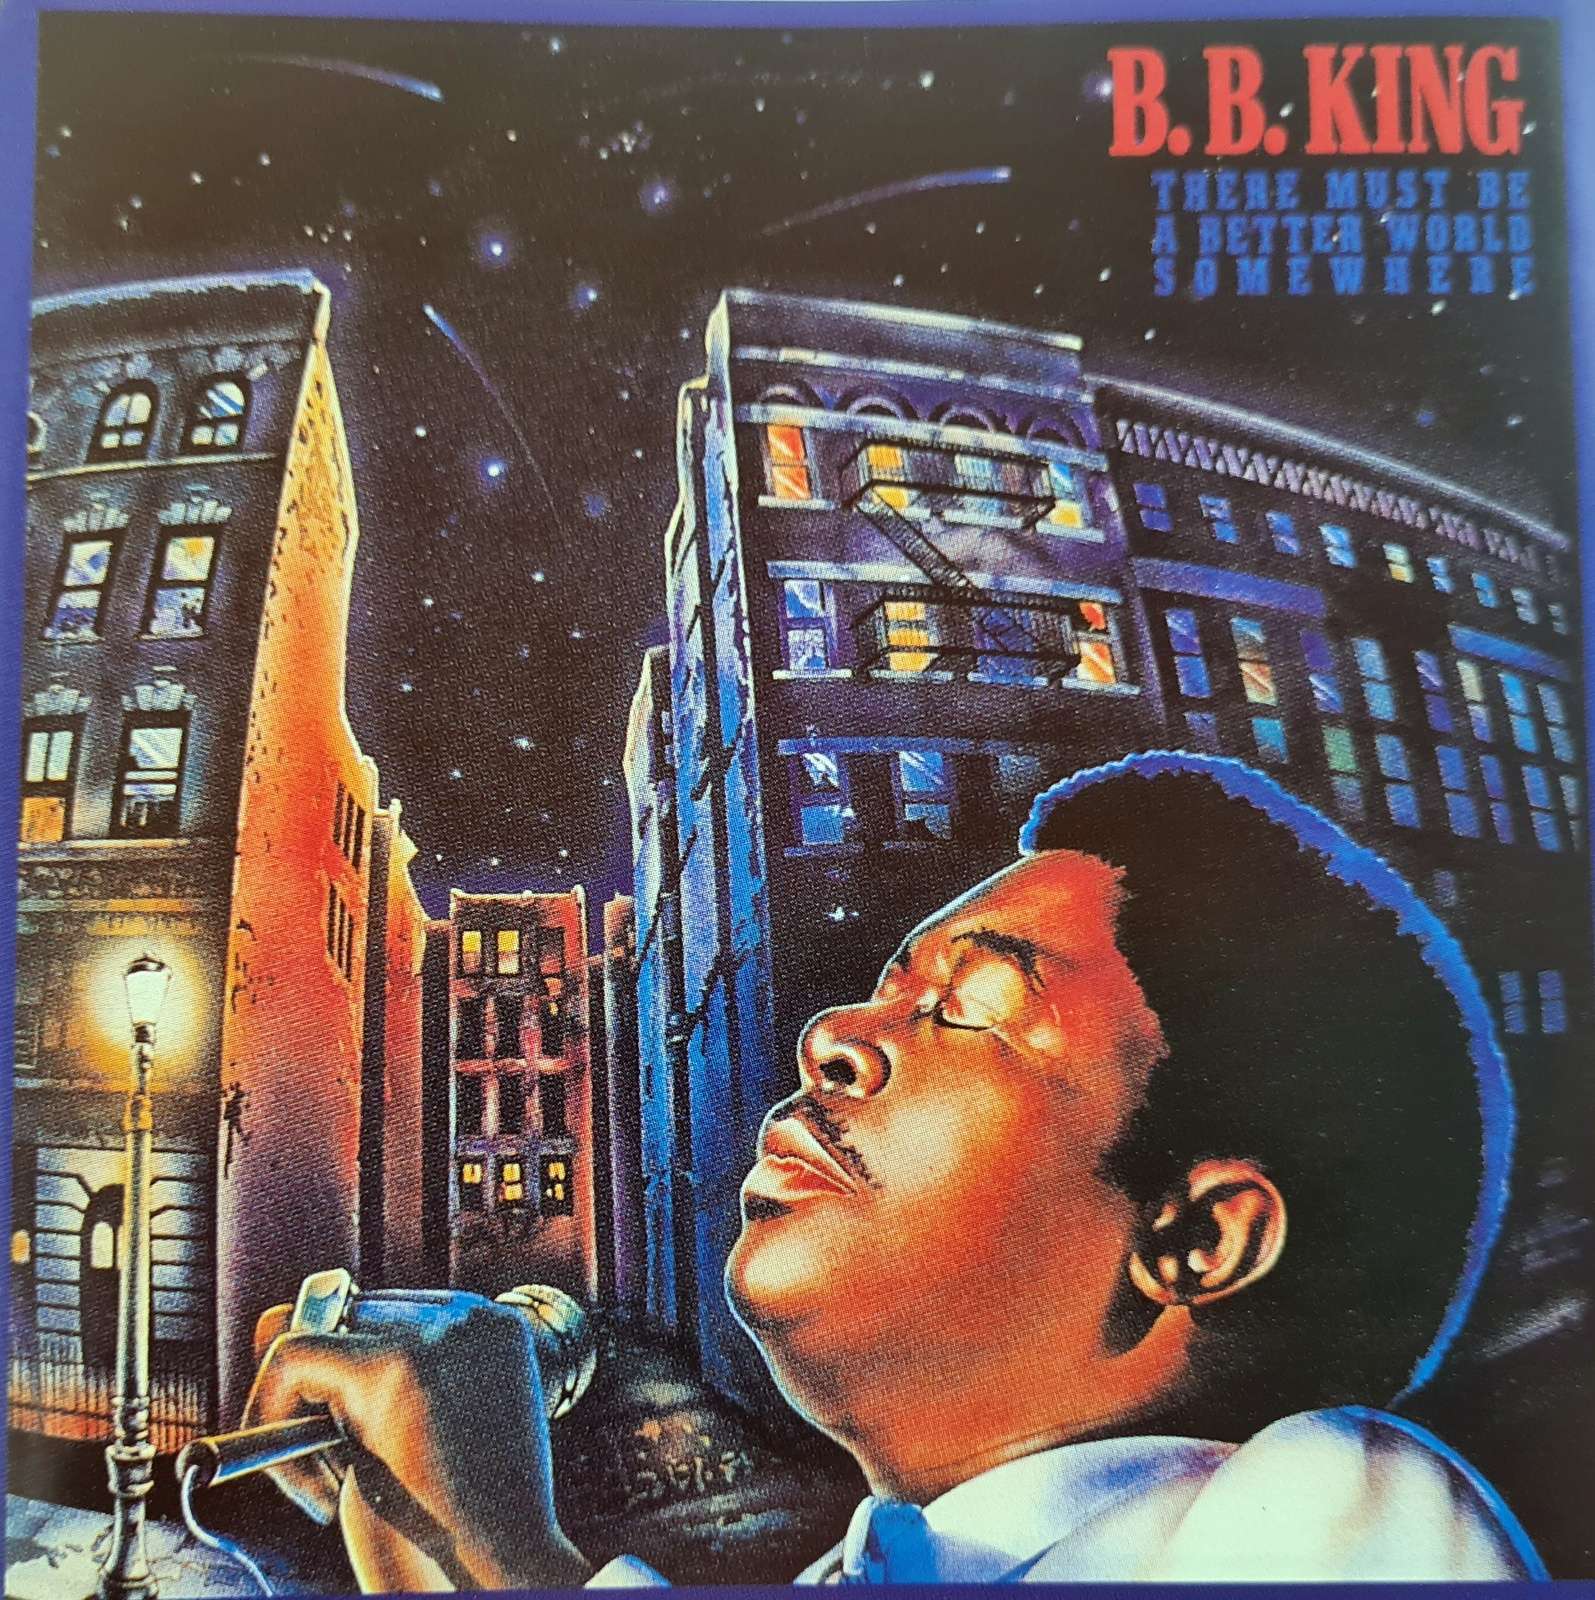 B.B. King - There Must Be a Better World Somewhere (CD)